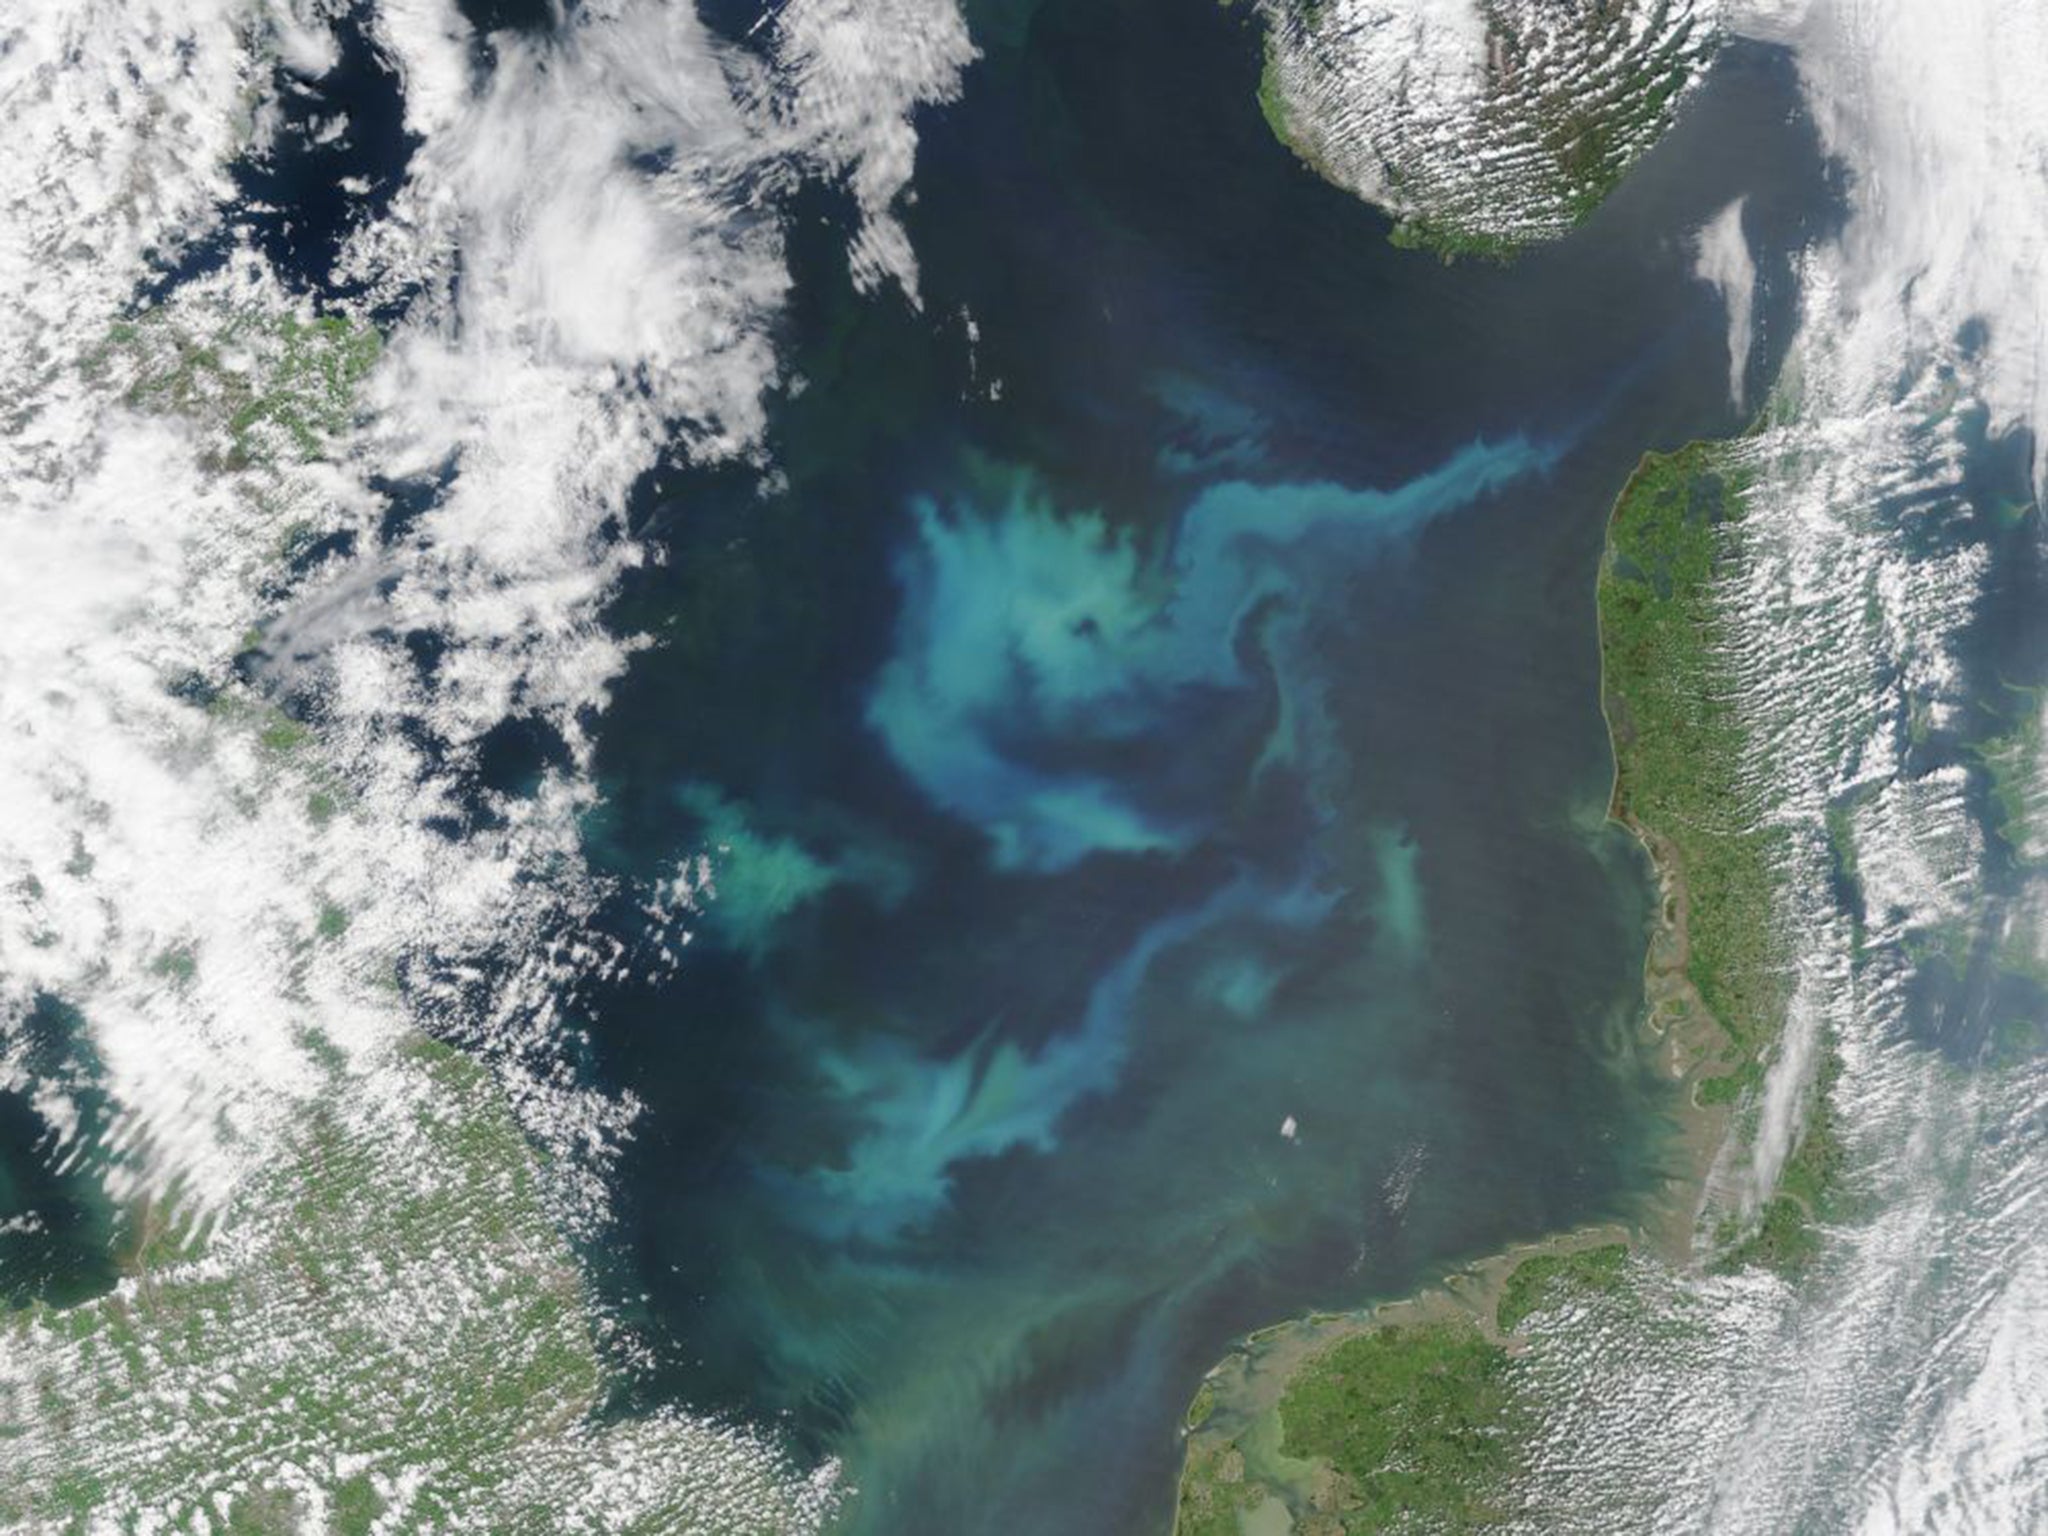 The North Atlantic is a fertile basin for plankton, the organisms blooming most abundantly in late spring and early summer due to high levels of nutrients in the water and increasing sunlight